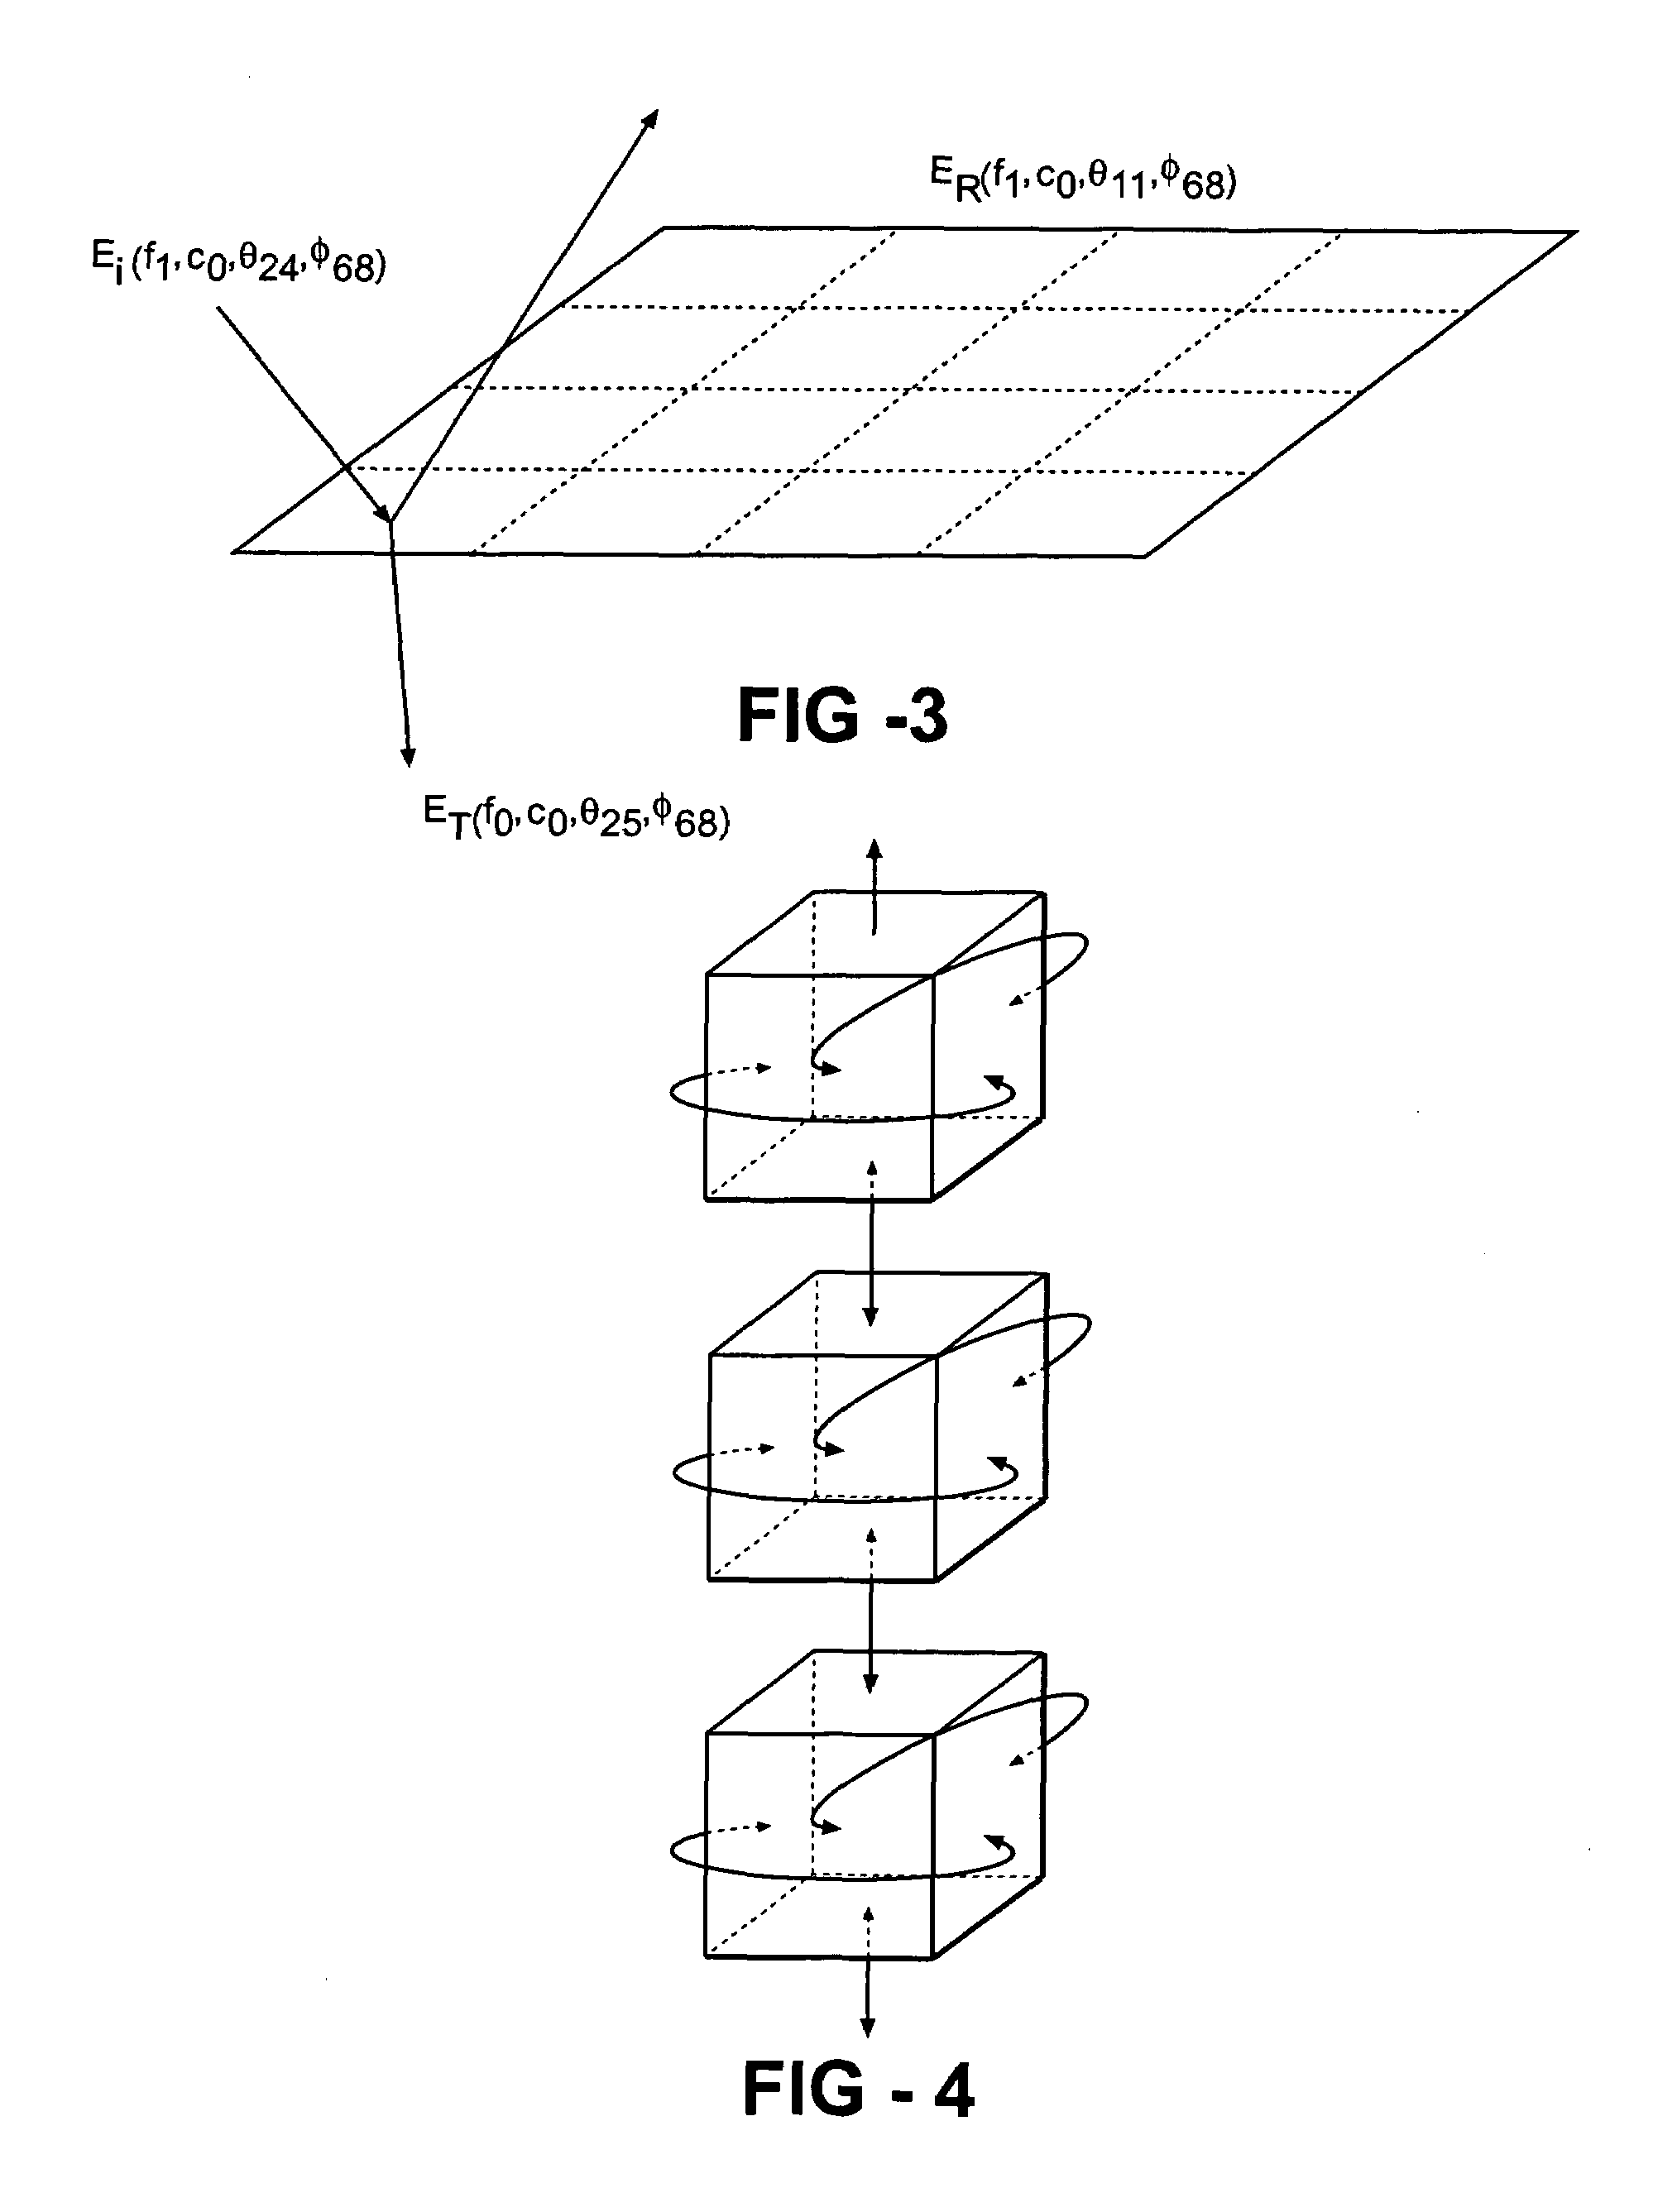 Method and program product for determining a radiance field in an optical environment